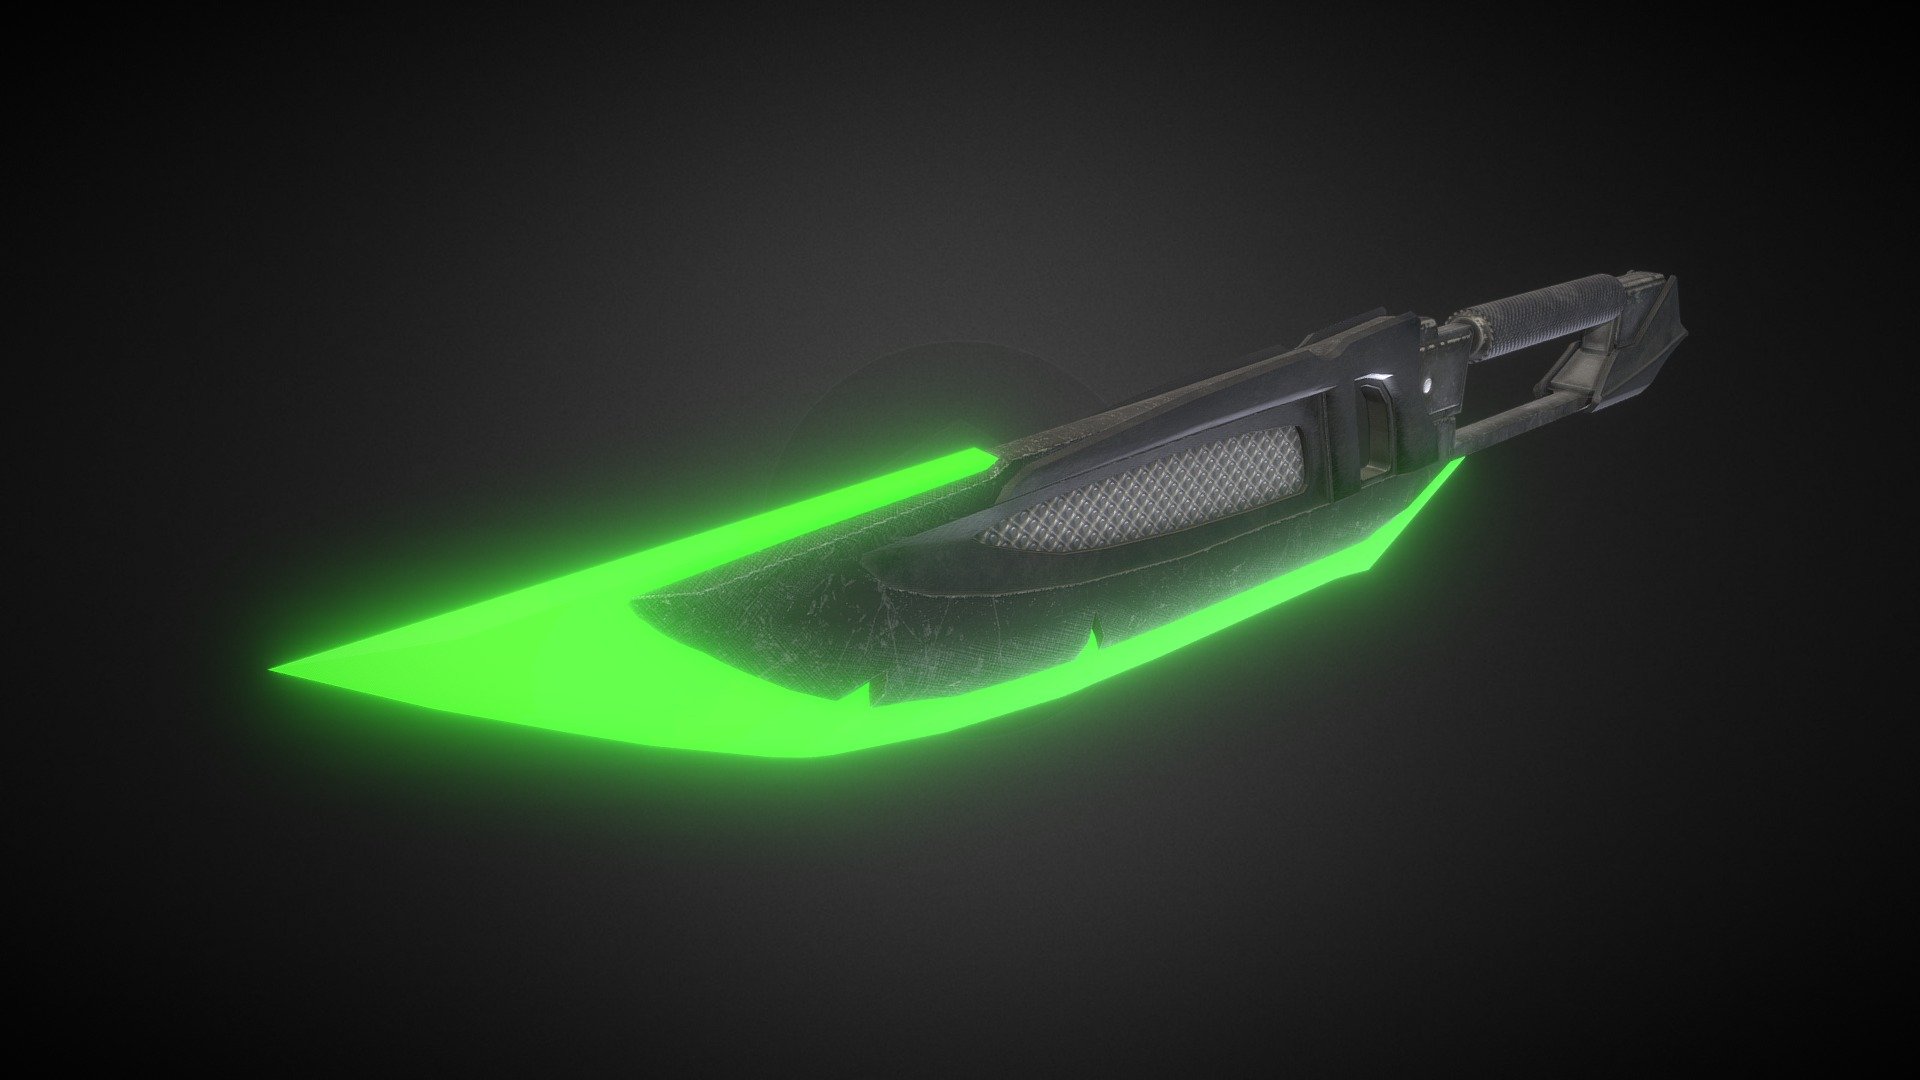 Futuristic knife with plasma blade in high definition. Optimized textures 2048x2048 PNG without quality loss. The blade has separate customizable material.

Includes textures:

- Albedo

- Metallic

- Normal

- AO

- Roughness - Sci-fi Plasma Knife [PBR] - 3D model by StarGames studio (@StarGamesstudio) 3d model